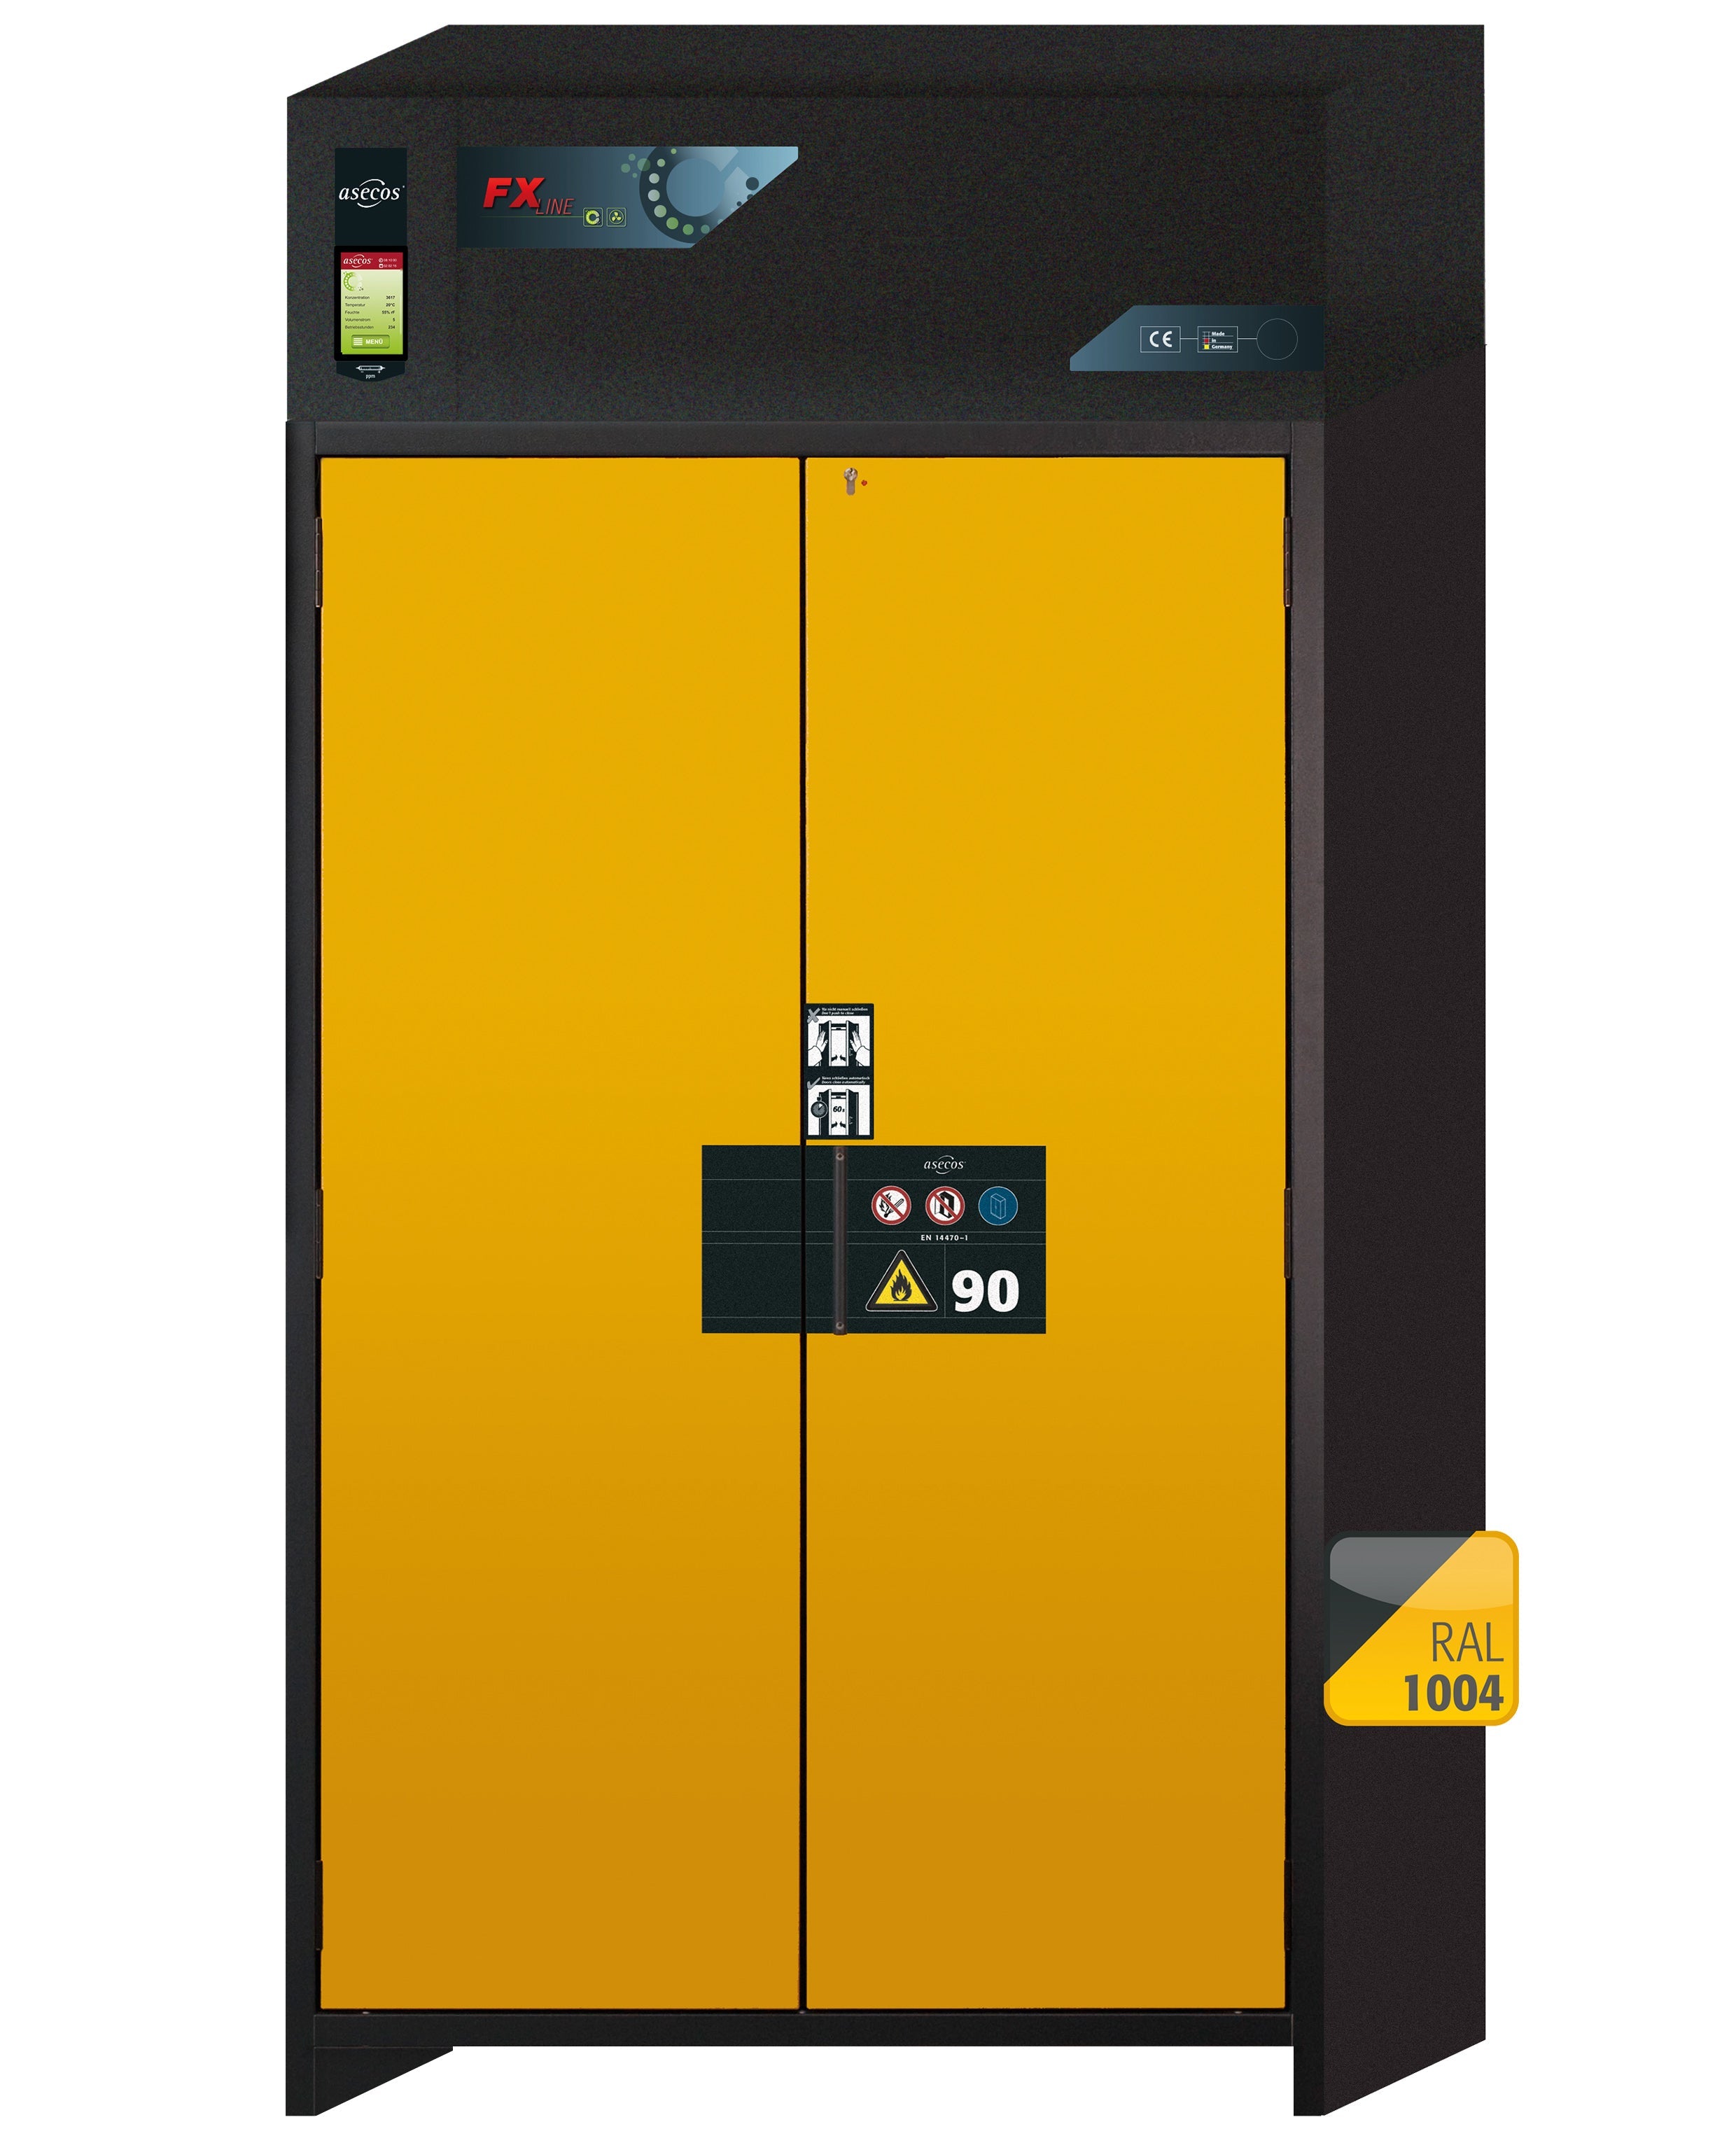 Type 90 recirculating air filter cabinet FX-PEGASUS-90 model FX90.229.120.WDAC in safety yellow RAL 1004 with 2x standard shelves (sheet steel)